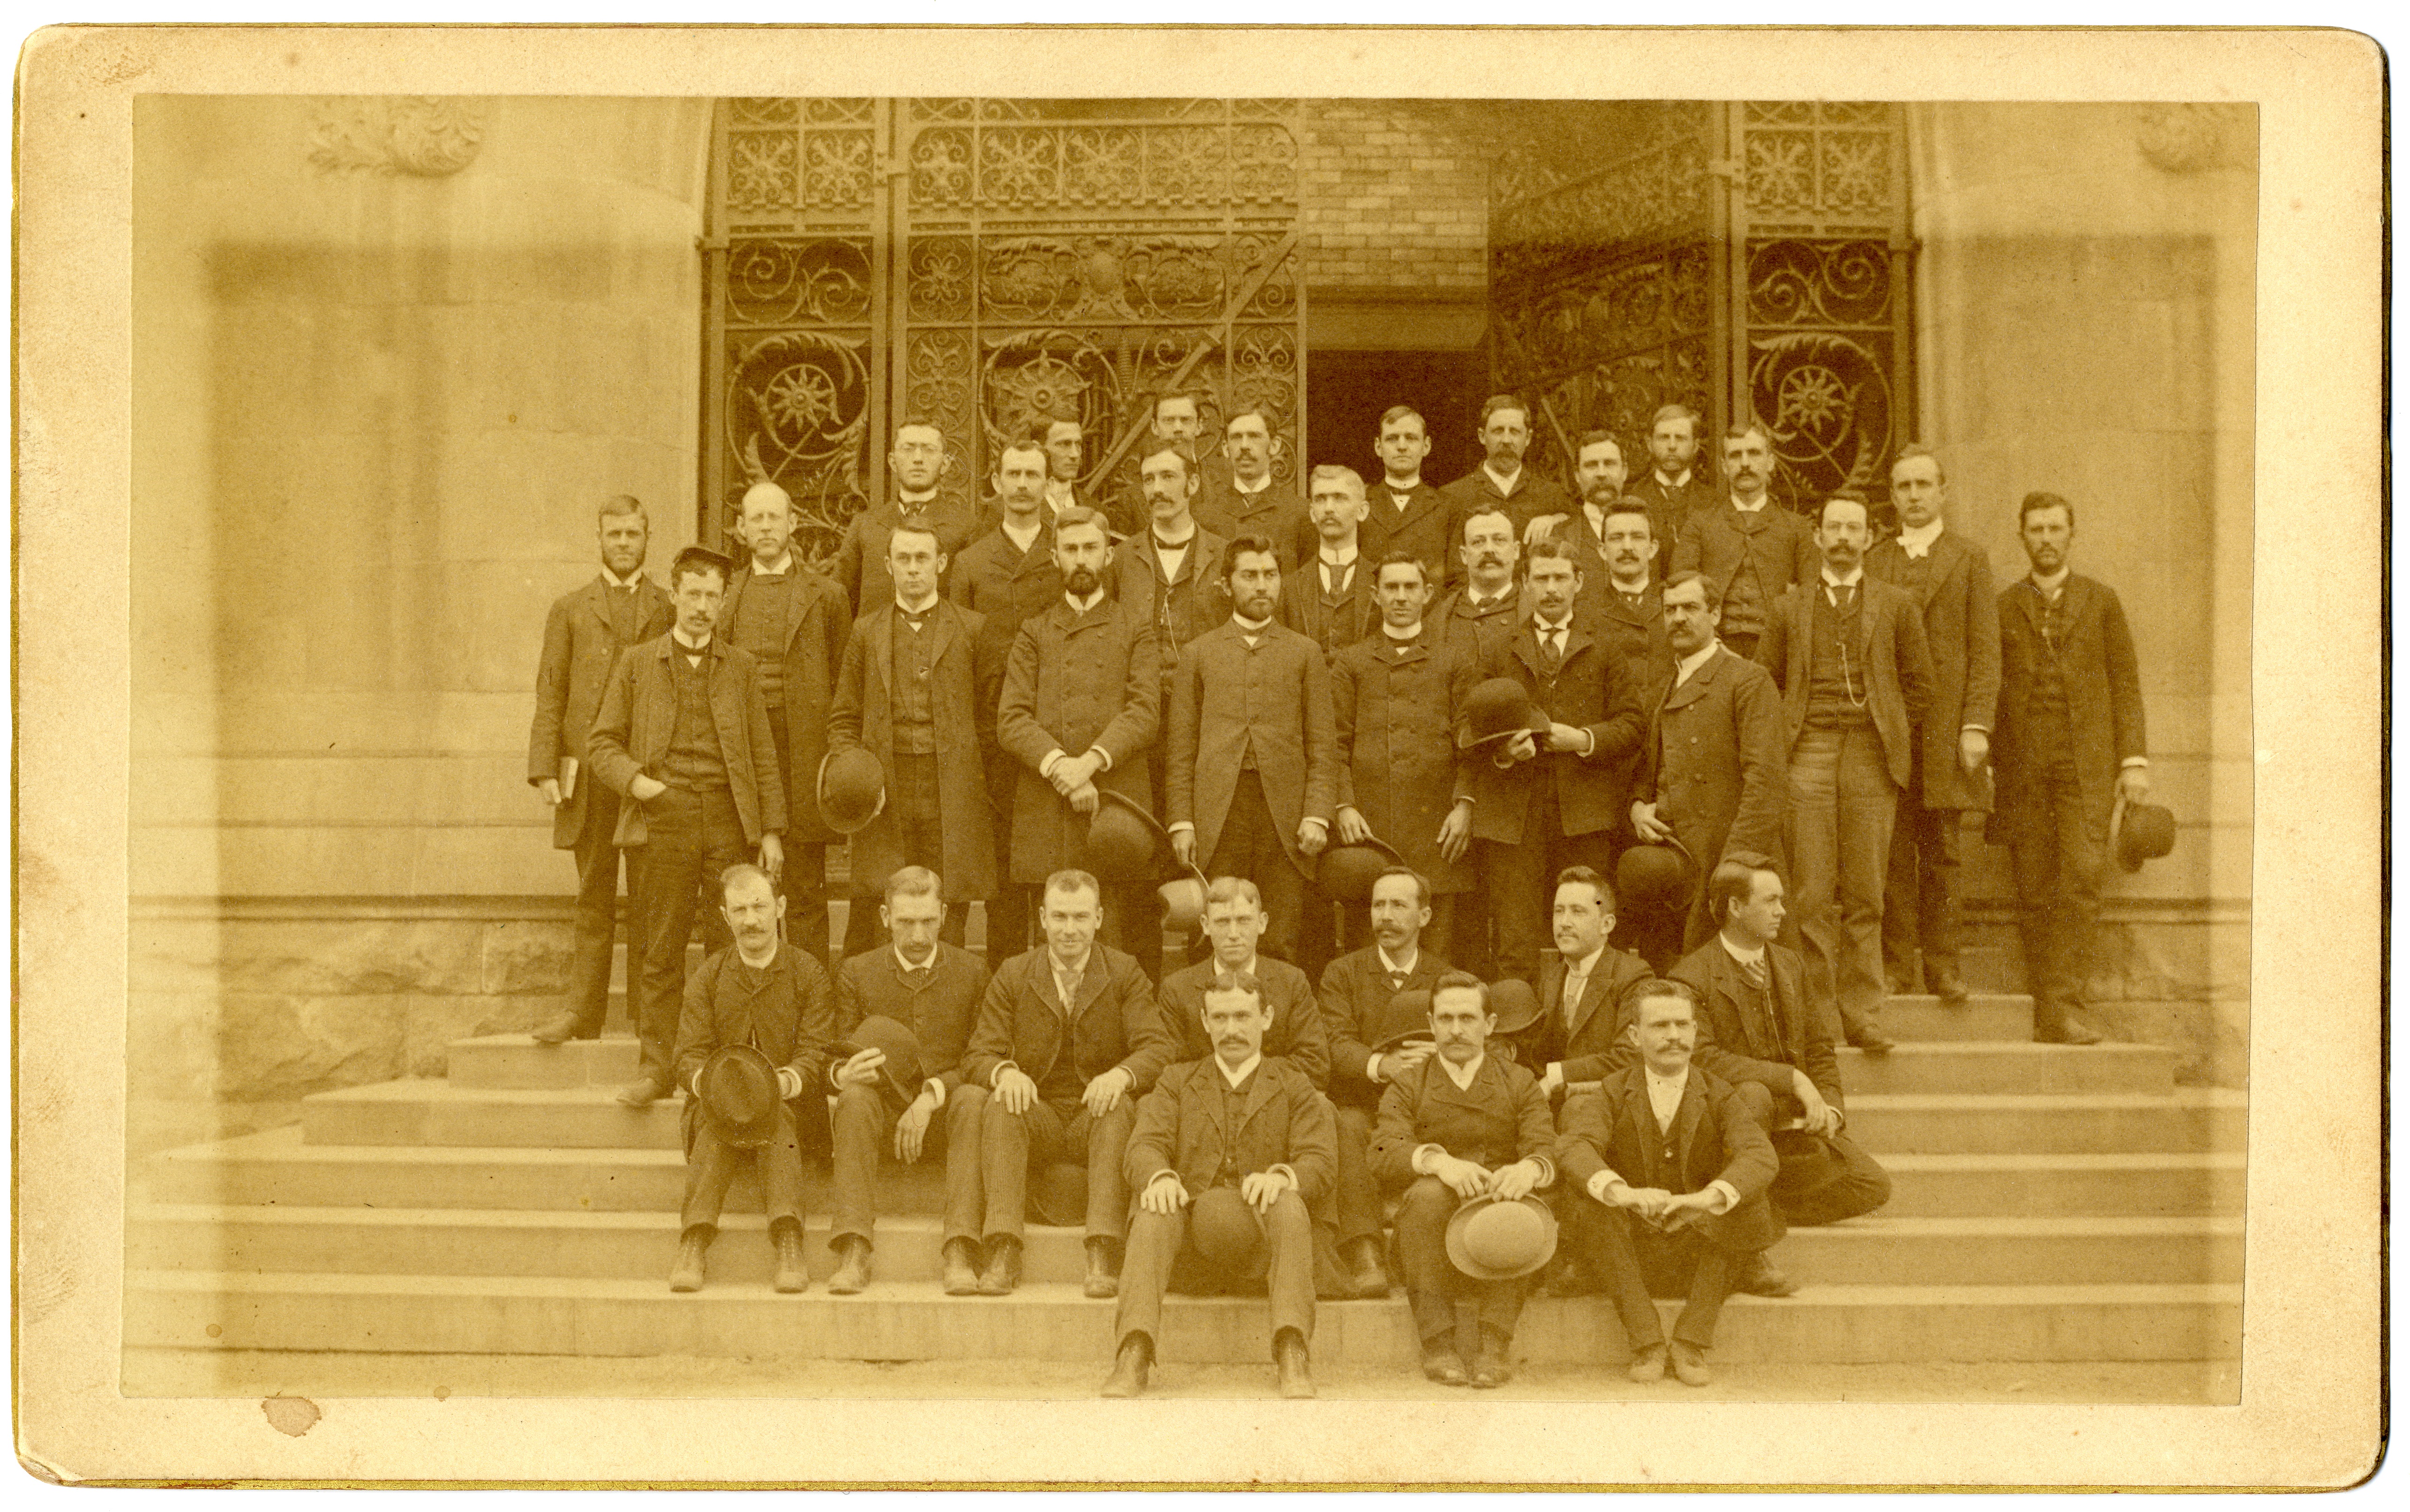 DTS students in front of Cornell Library, 1890.  Peter Deunov is standing in the center.